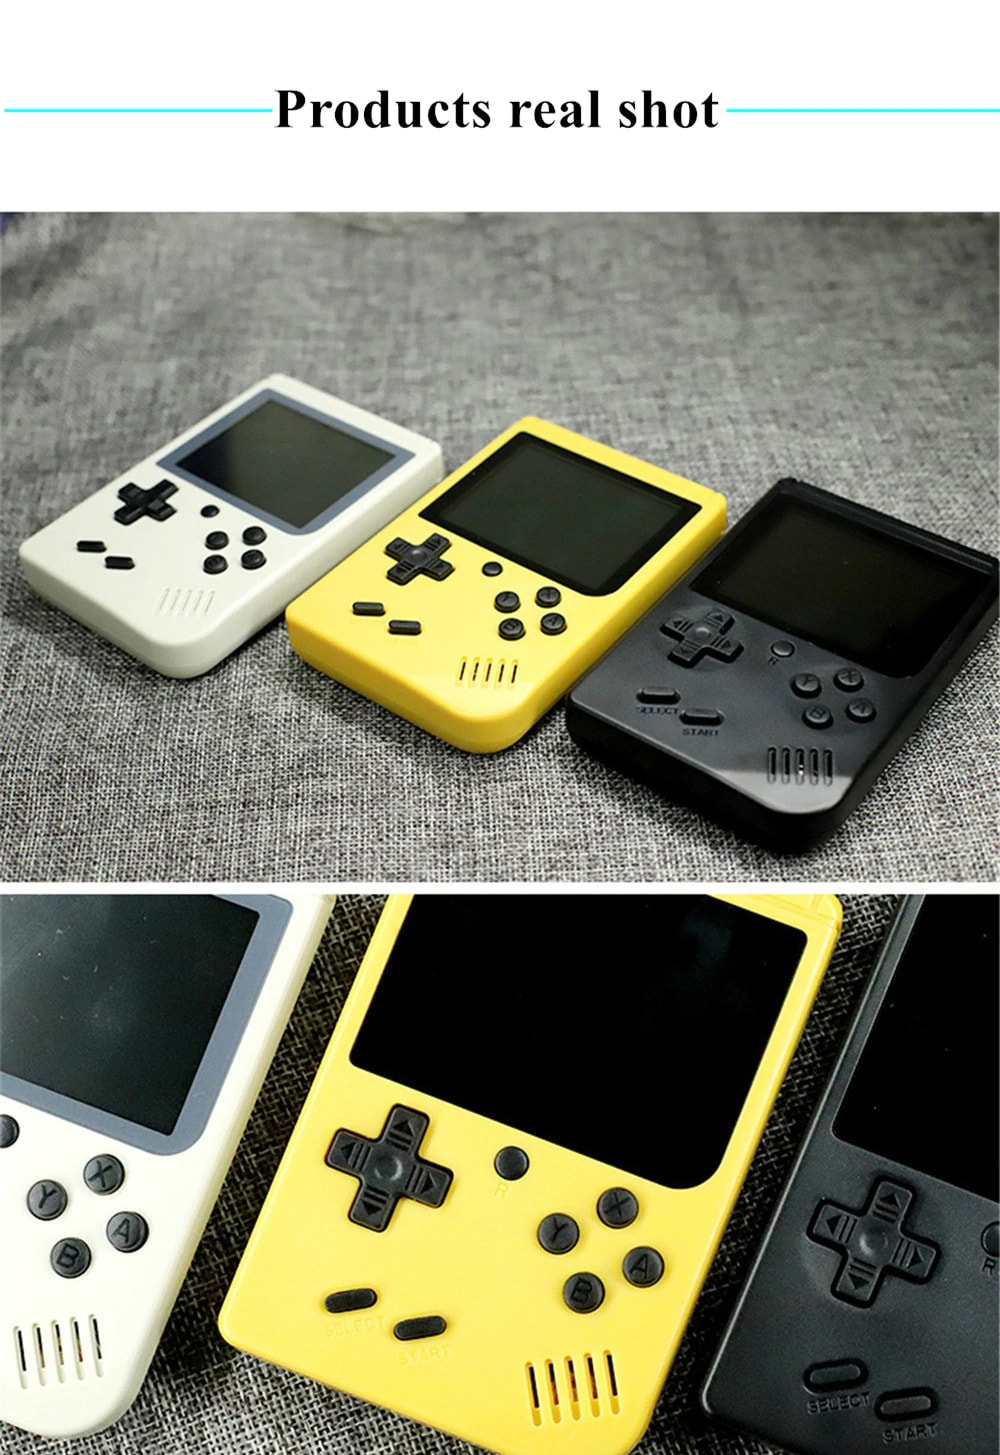 which gameboy has a brighter screen